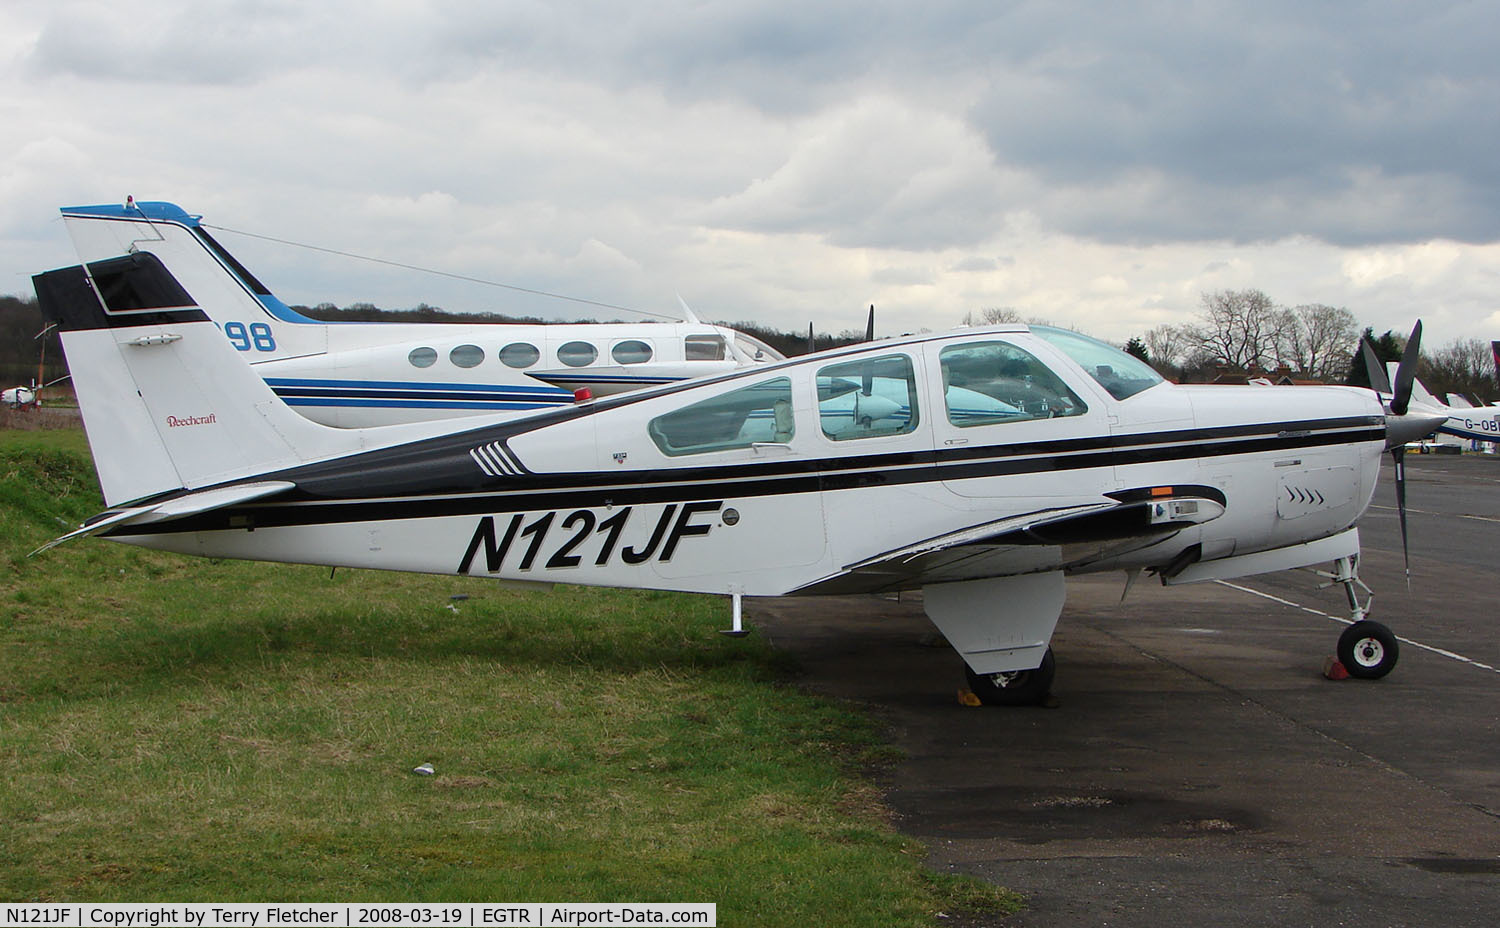 N121JF, 1991 Beech F33A Bonanza C/N CE-1578, Part of the busy GA scene at Elstree Airfield in the northern suburbs of London